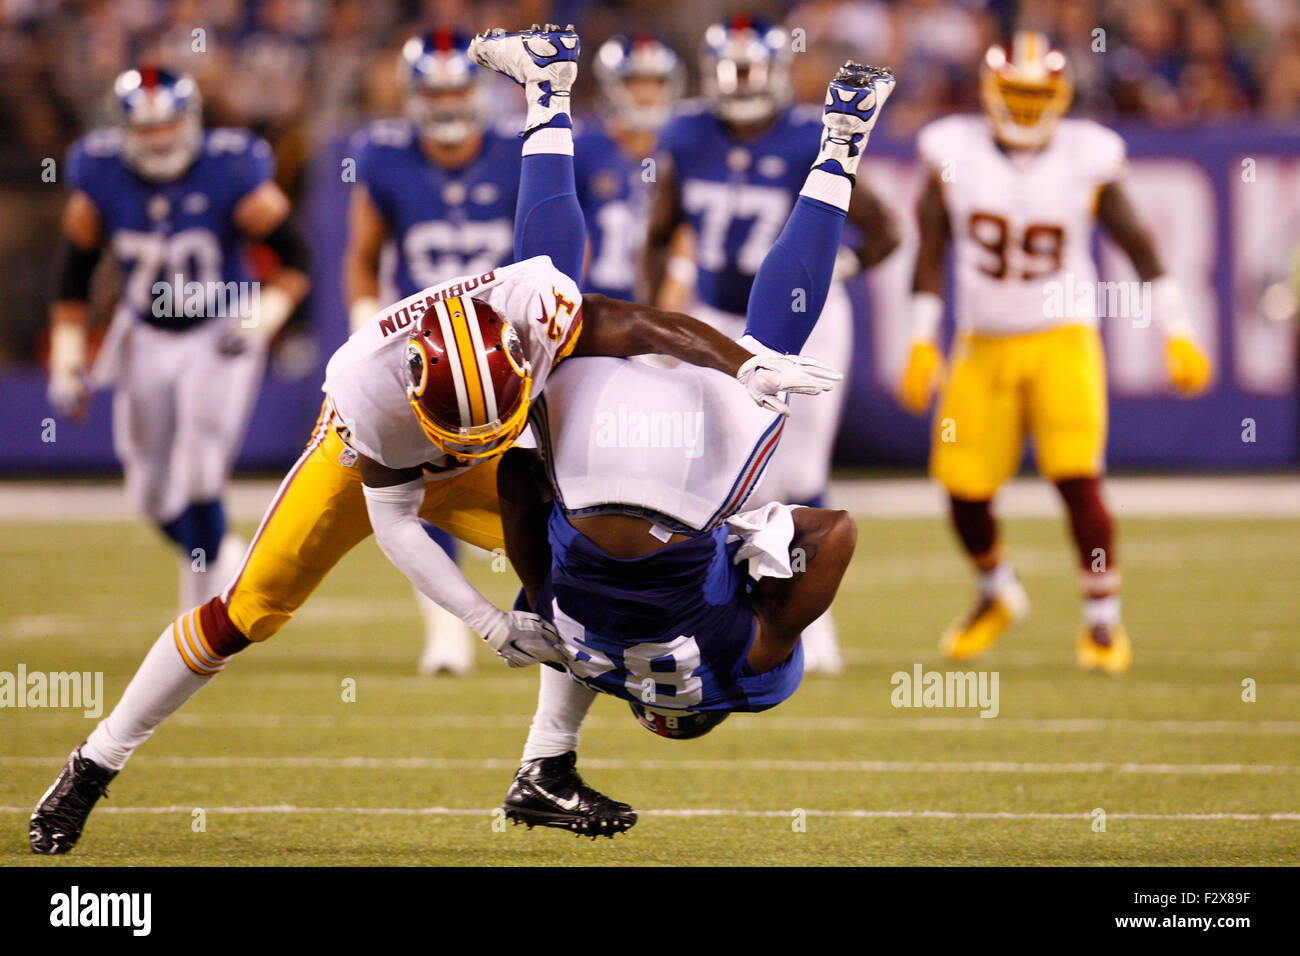 East Rutherford, New Jersey, USA. 24th September, 2015. New York Giants tight end Larry Donnell (84) gets flipped by Washington Redskins strong safety Trenton Robinson (34) after catching the ball during the NFL game between the Washington Redskins and the New York Giants at MetLife Stadium in East Rutherford, New Jersey. The New York Giants won 32-21. Christopher Szagola/CSM/Alamy Live News Stock Photo